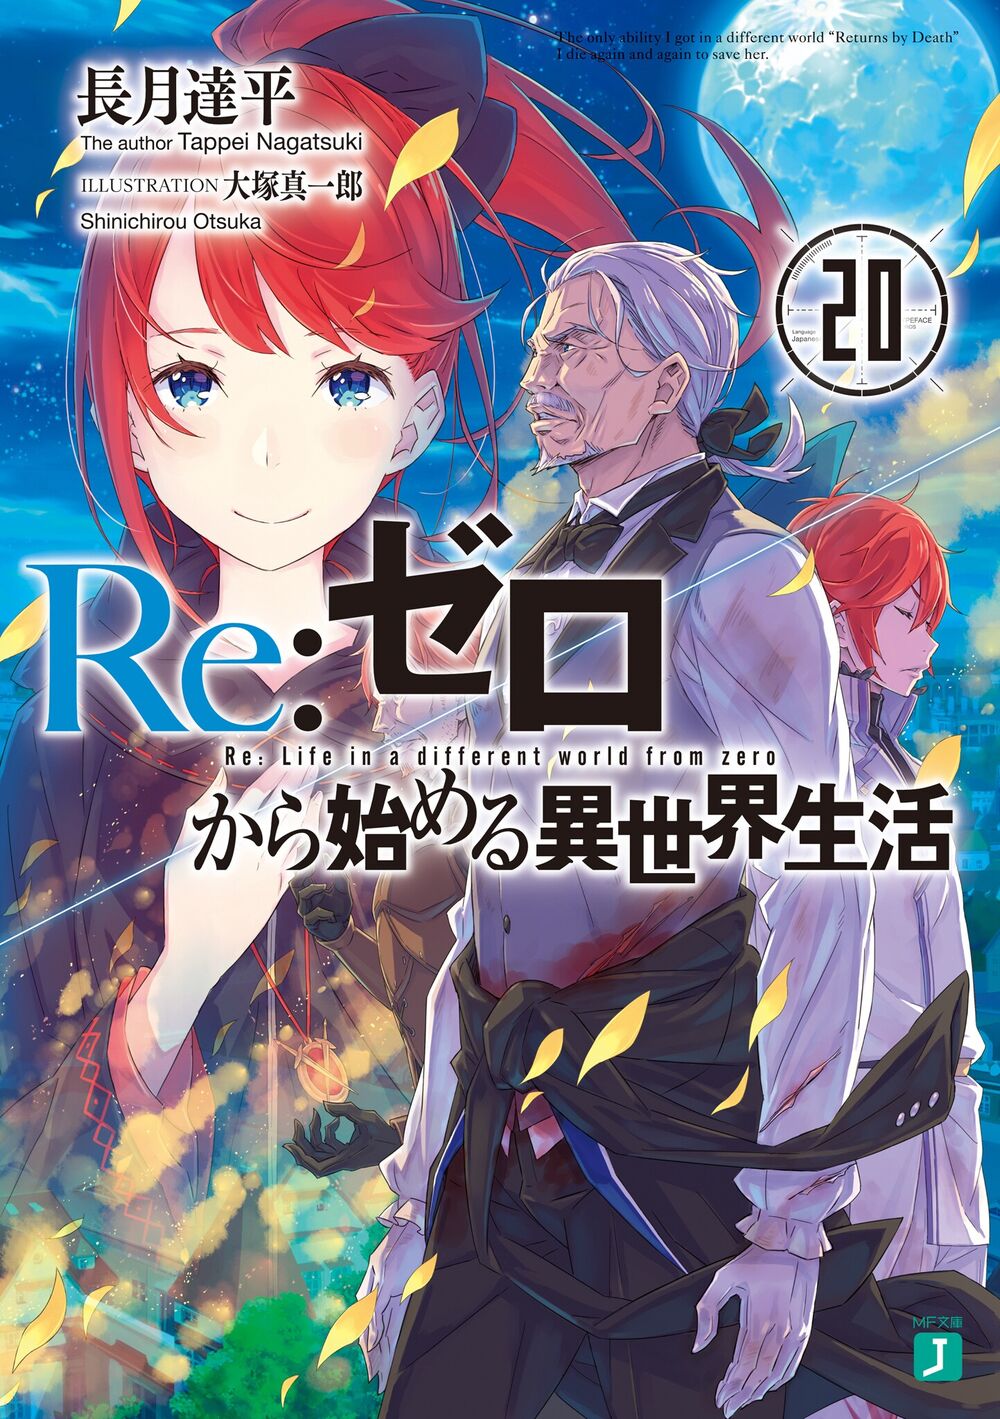 Re:ZERO -Starting Life in Another World-, Vol. 1 by Tappei